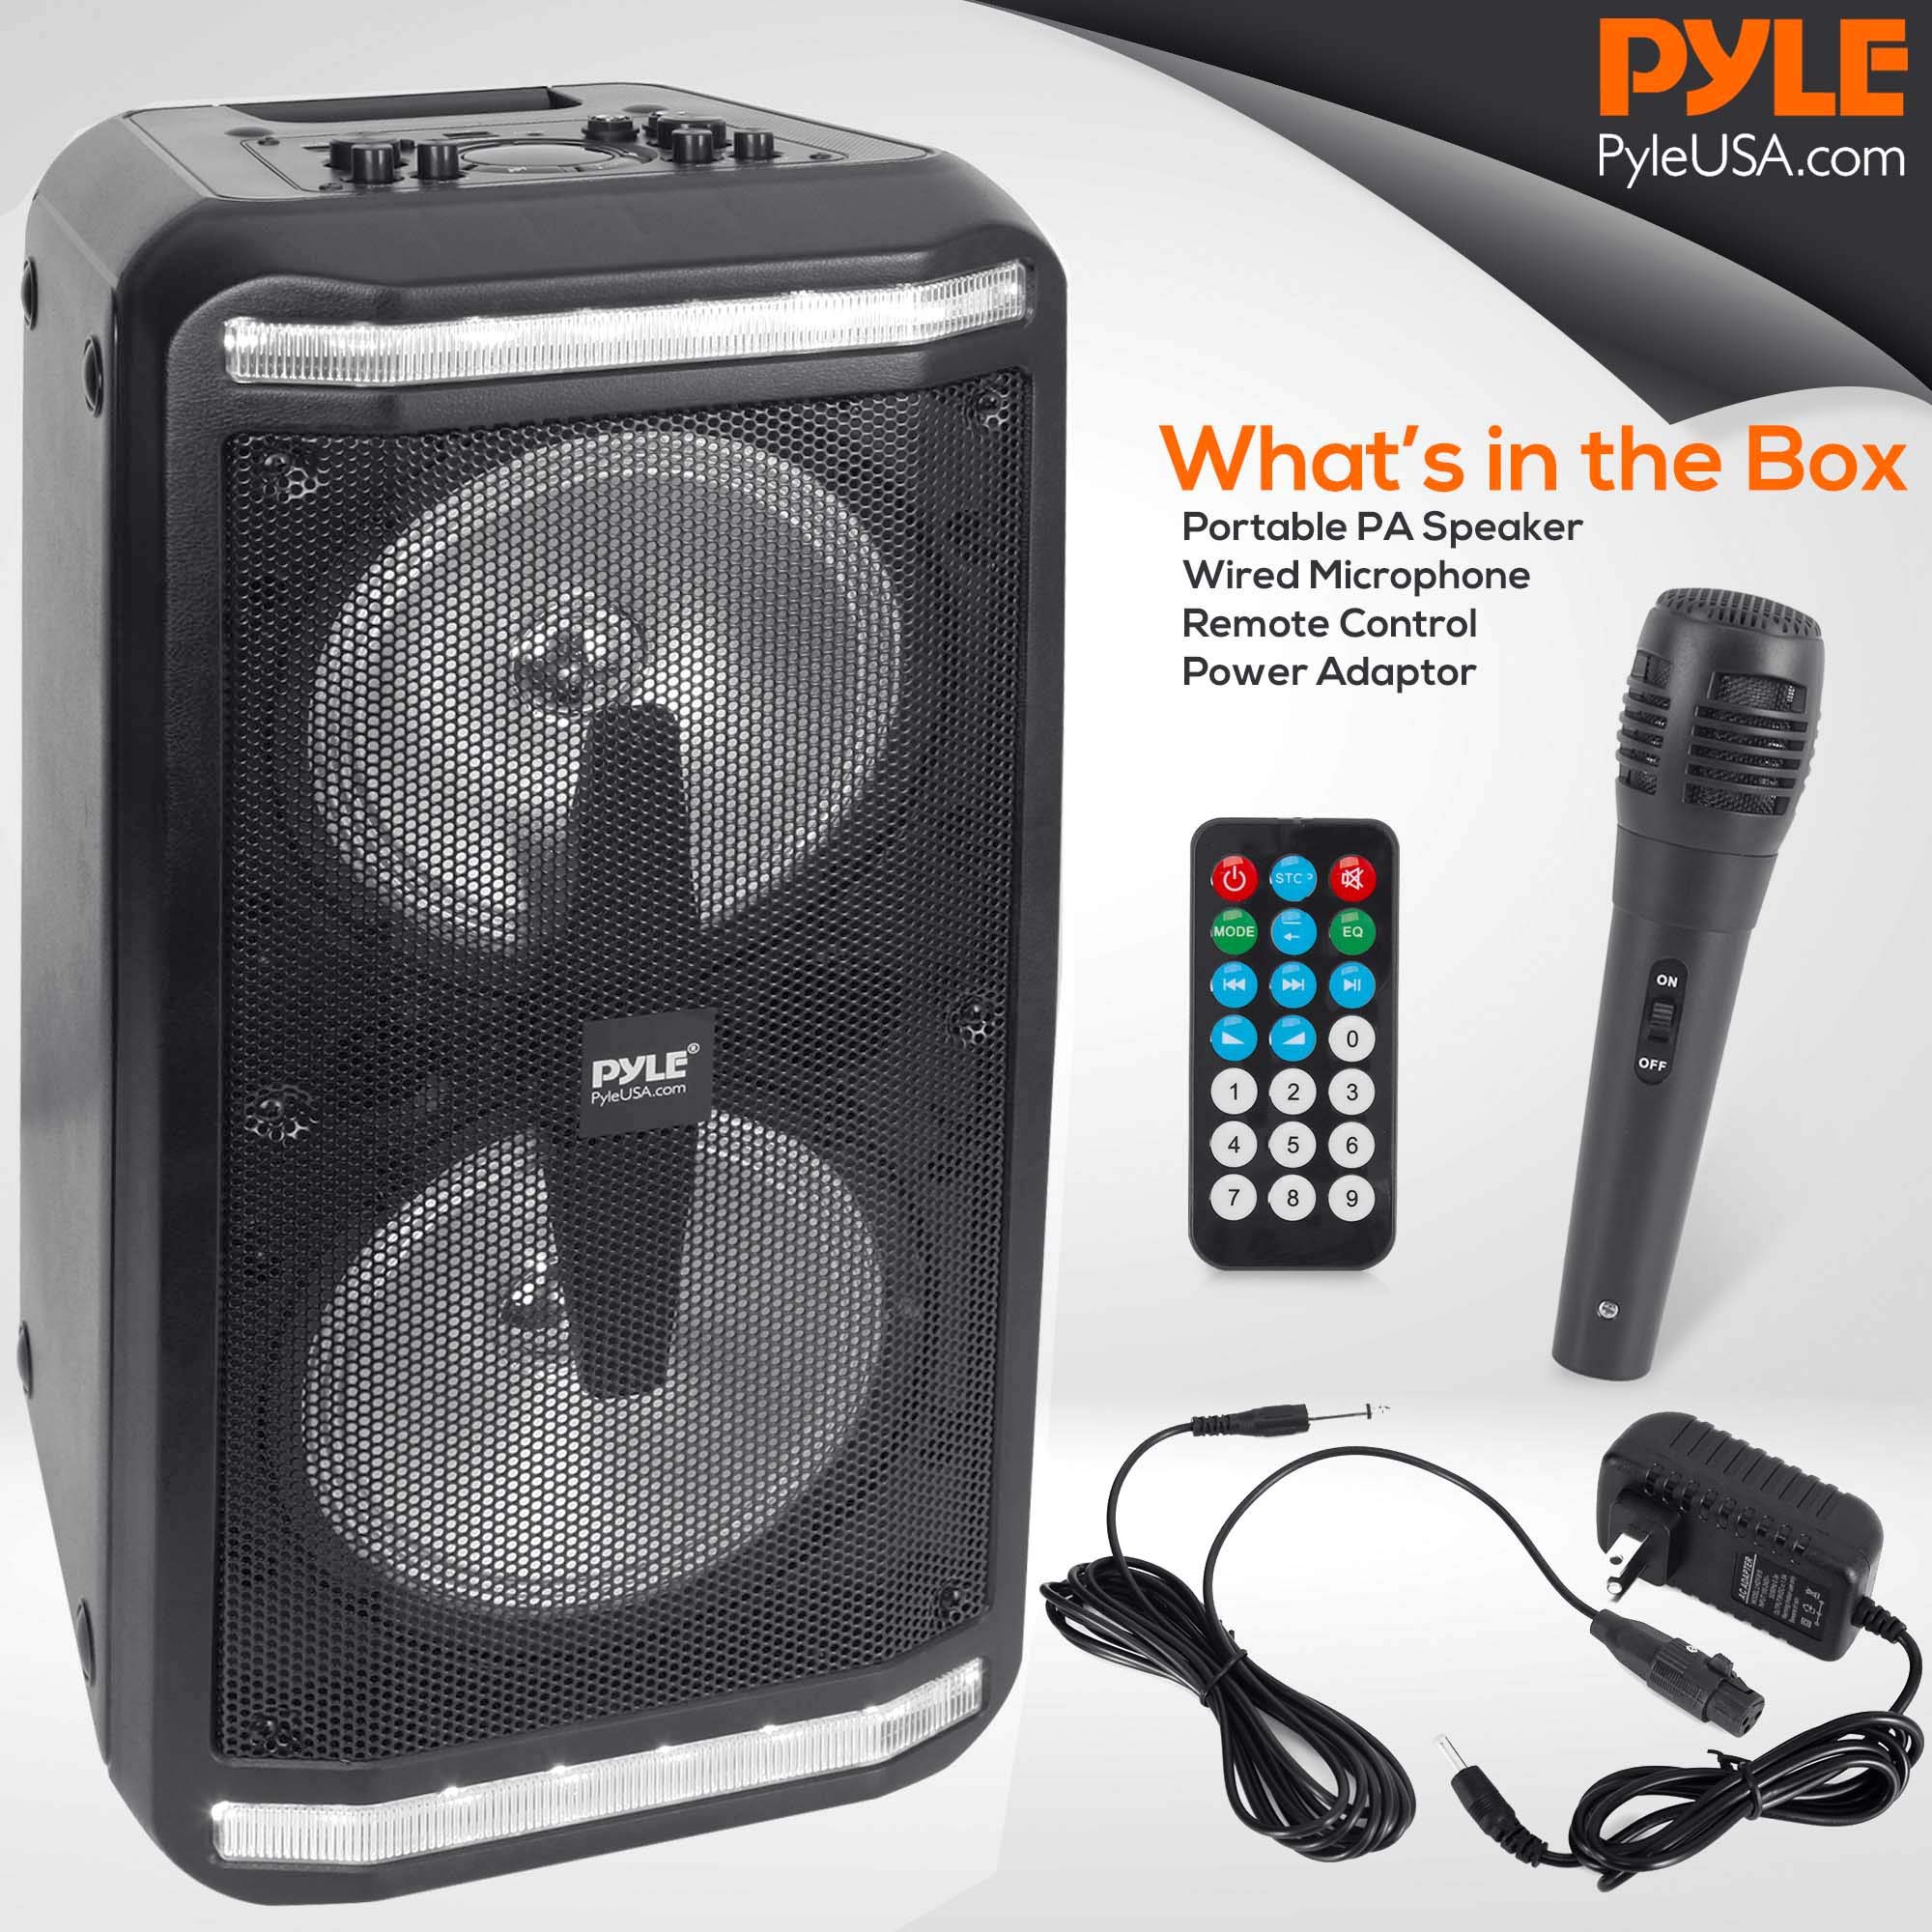 Pyle Bluetooth Speaker & Microphone System - Portable Stereo Karaoke Speaker with Wired Mic, Built-in LED Party Lights, MP3/USB, FM Radio (6.5’’ Subwoofers, 500 Watt MAX) (PPHP266B.5)